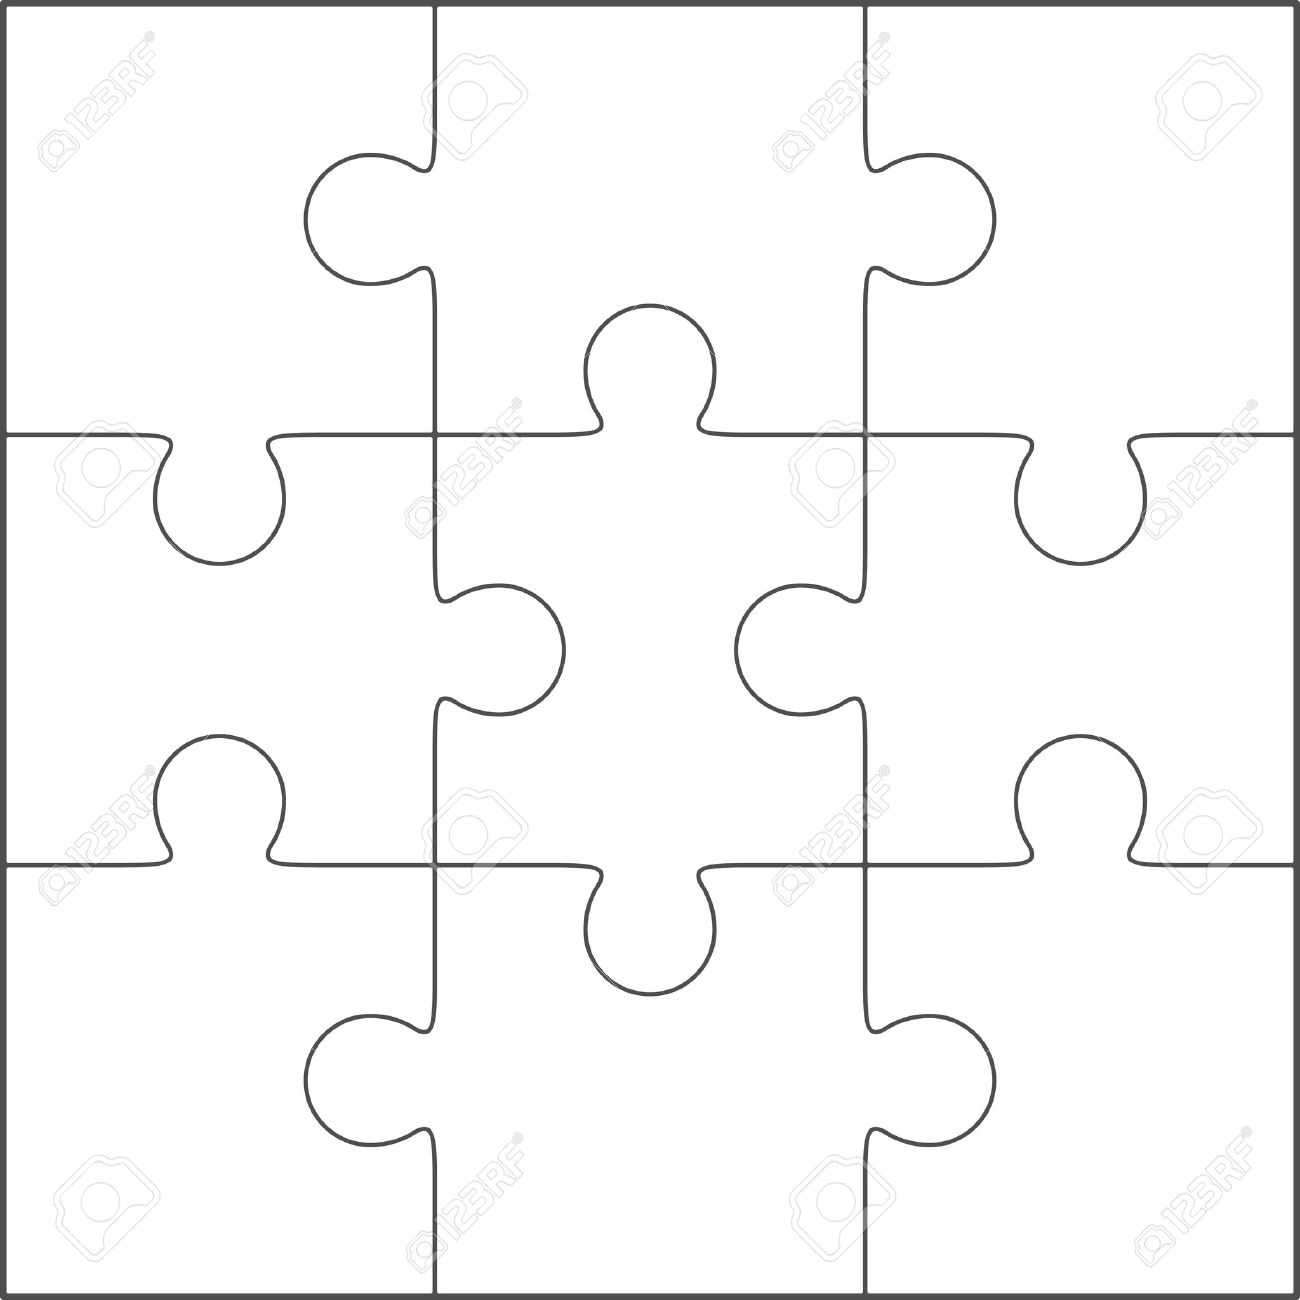 Jigsaw Puzzle Vector, Blank Simple Template 3X3 Intended For Blank Jigsaw Piece Template